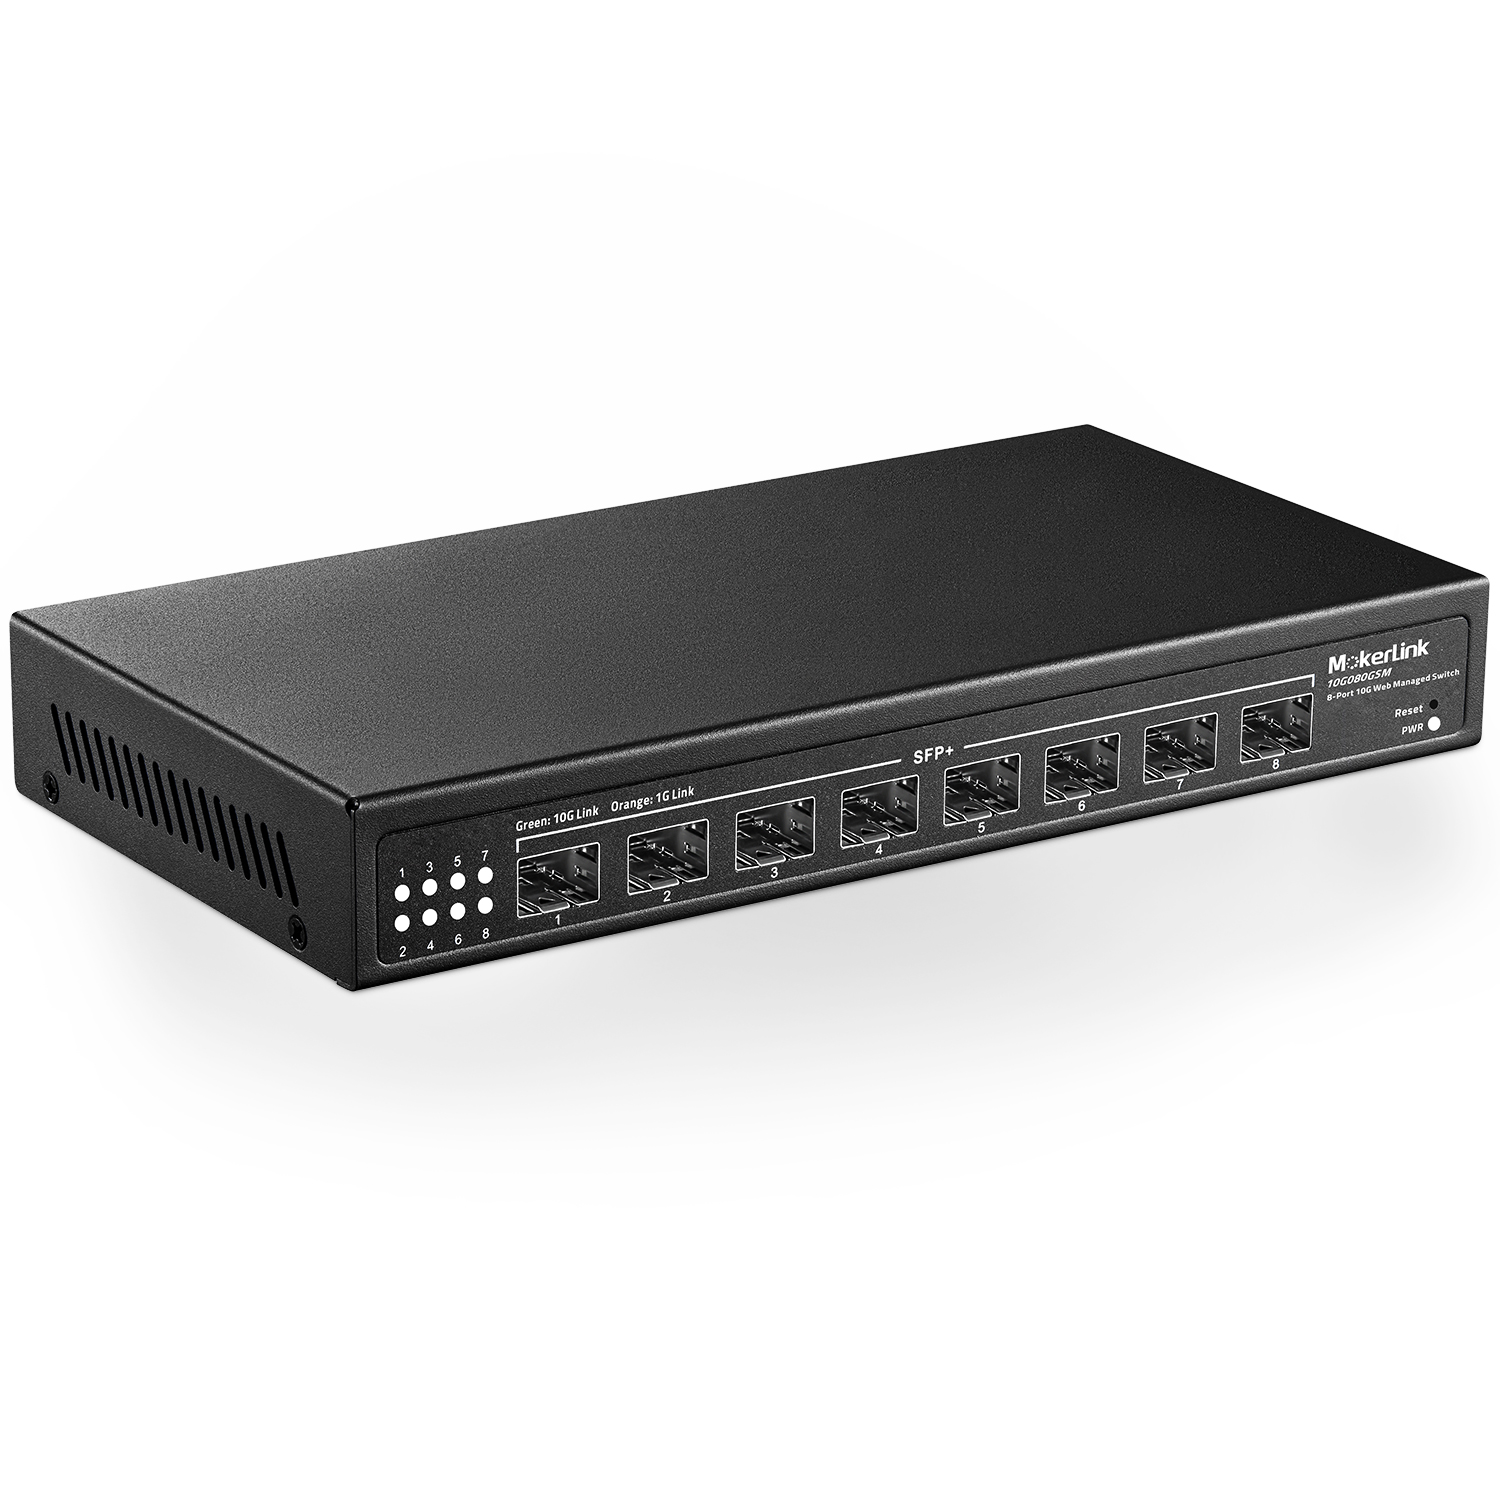 24-Port CableShare 10/100 Fast Ethernet Switch – Dualcomm